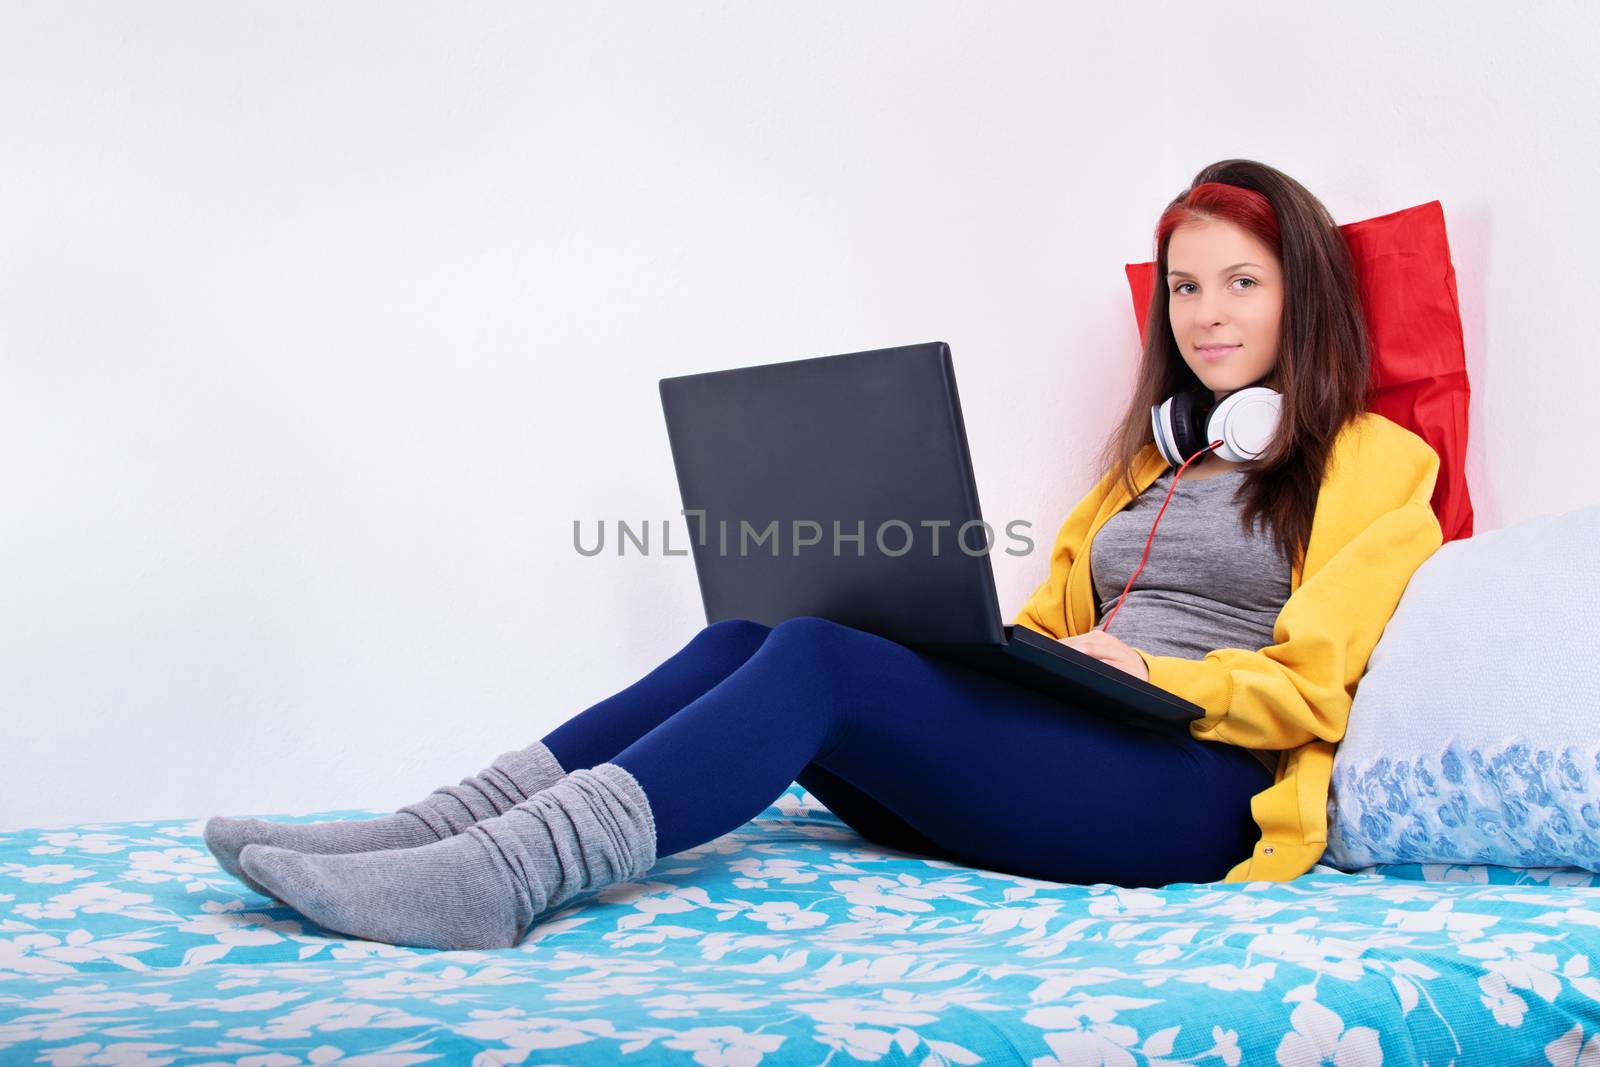 Beautiful smiling young girl sitting on her bed with a laptop in her lap and headphones around her neck.